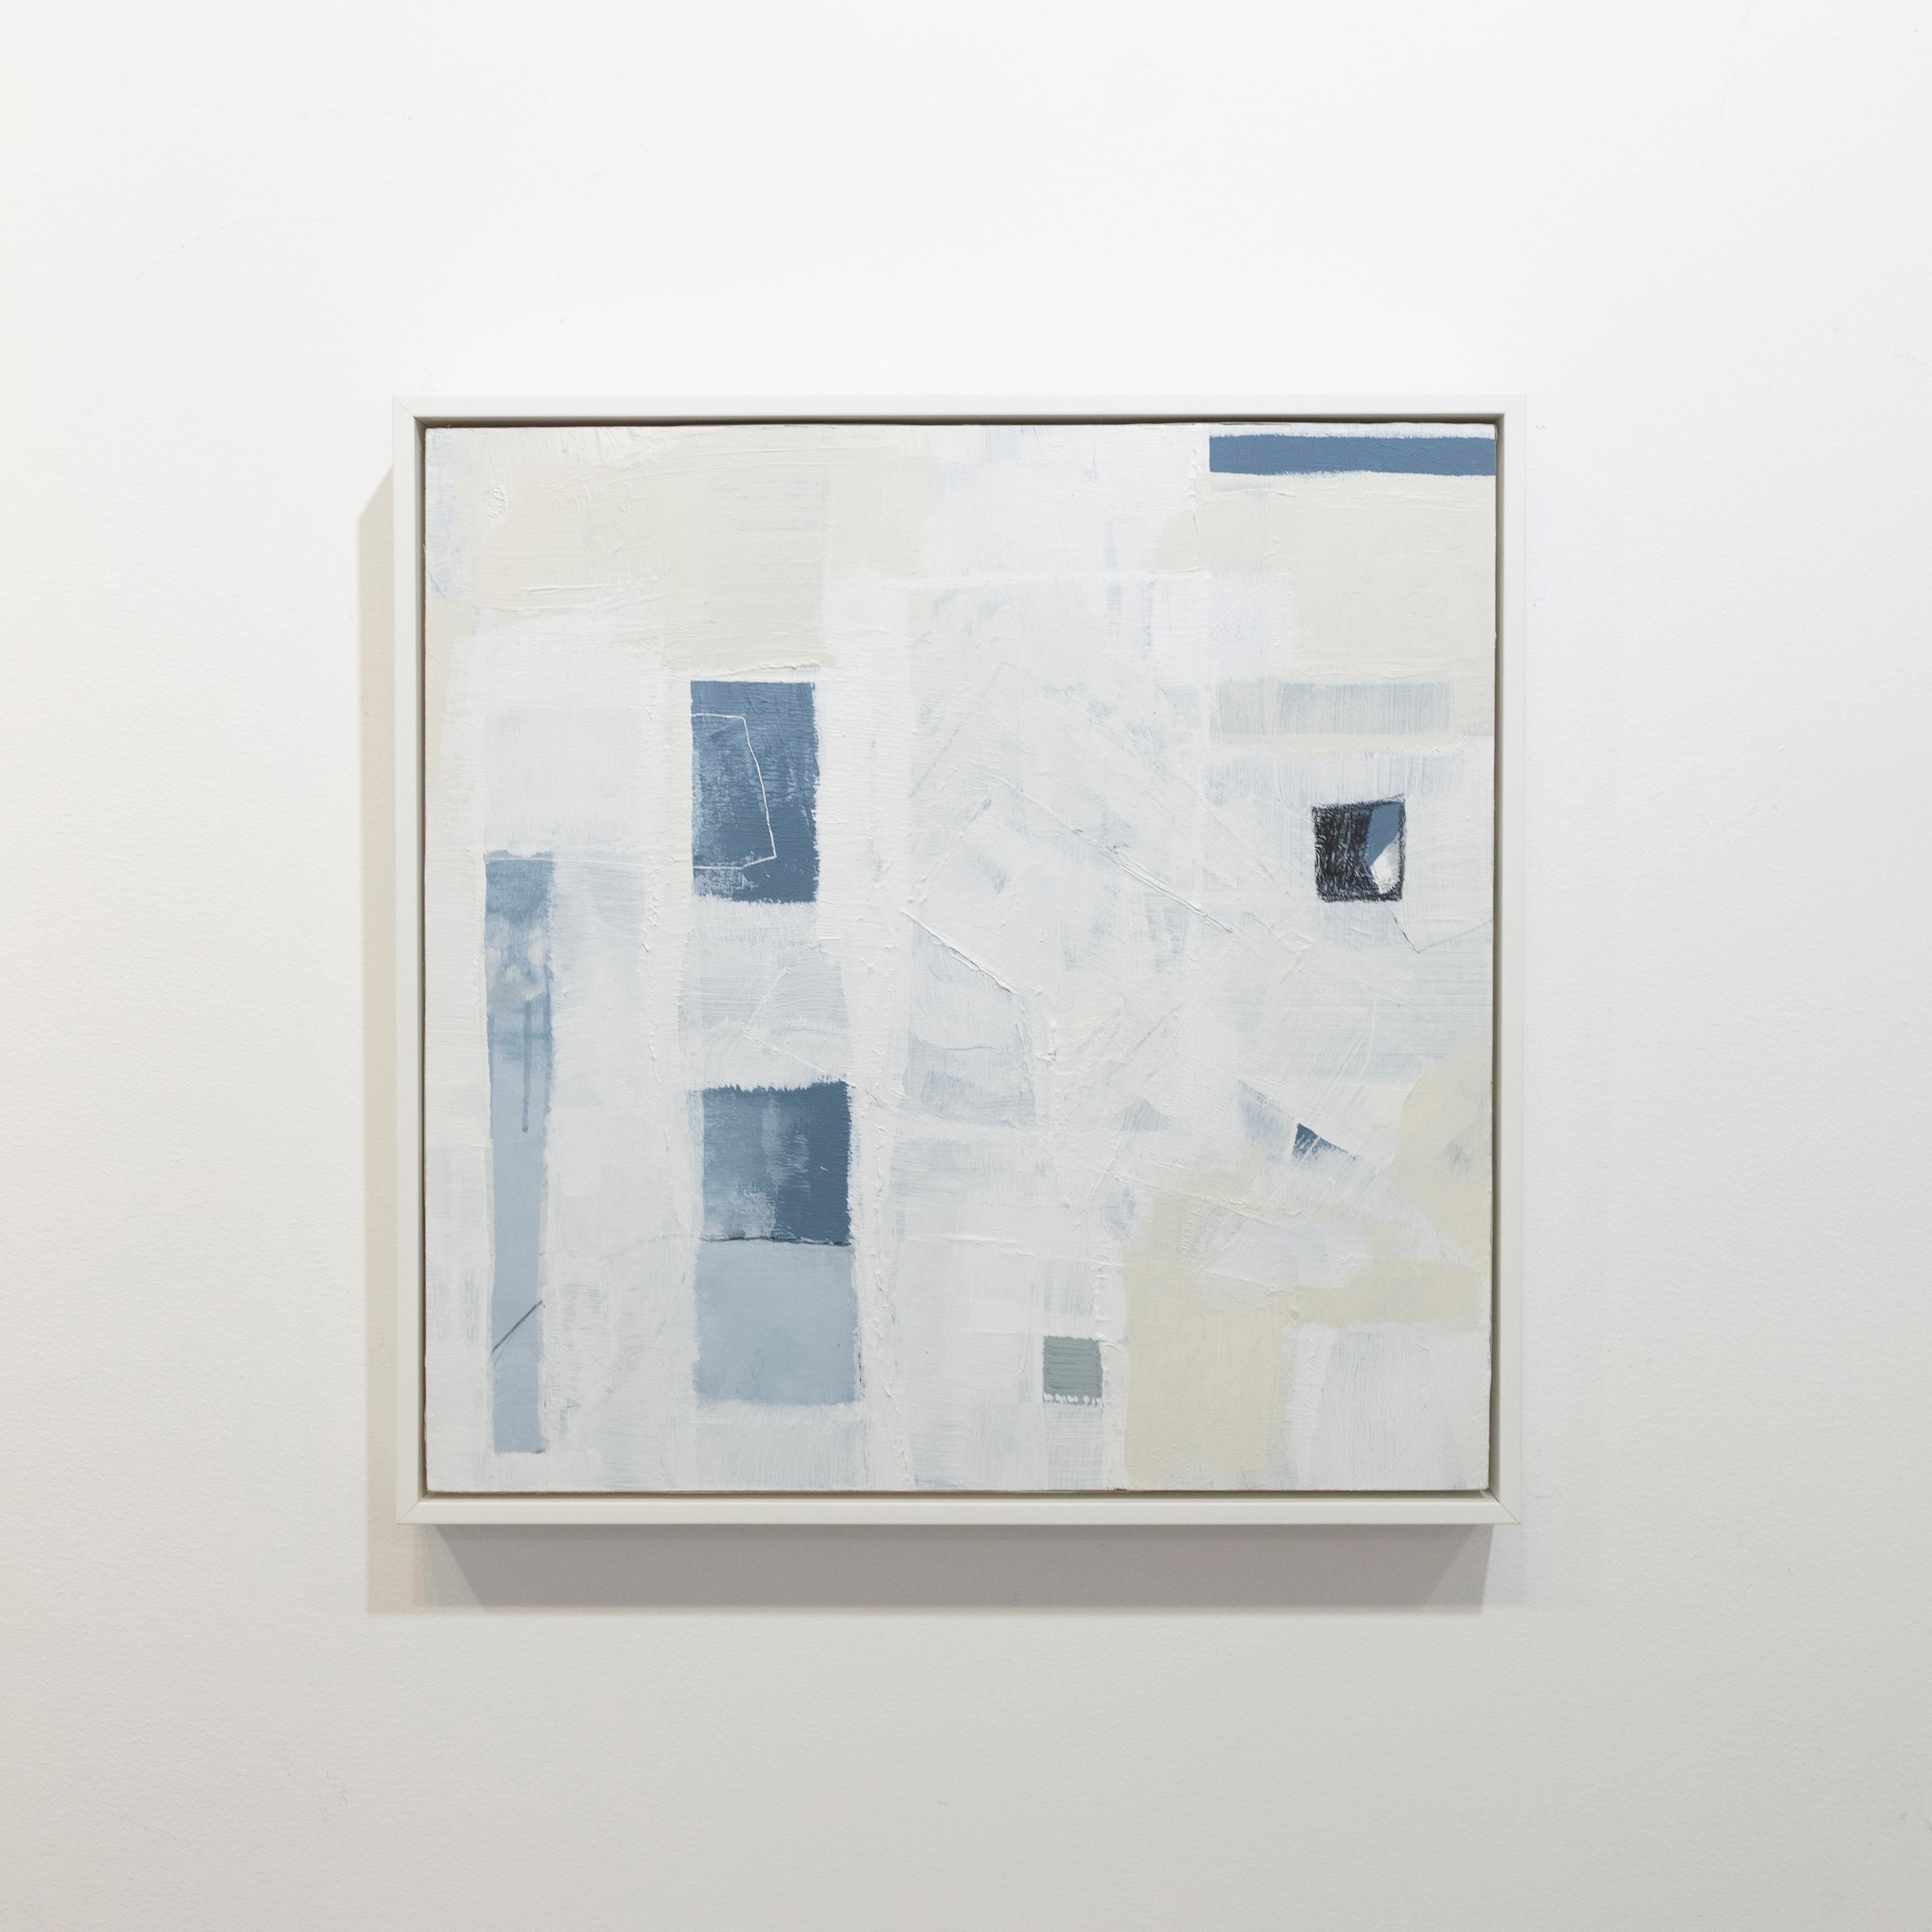 This abstract painting by Sue De Chiara is made with acrylic paint on panel. It features a light blue, white, and off-white palette, with a layered, minimalist composition. The painting is professionally framed in a white floater frame, and measures